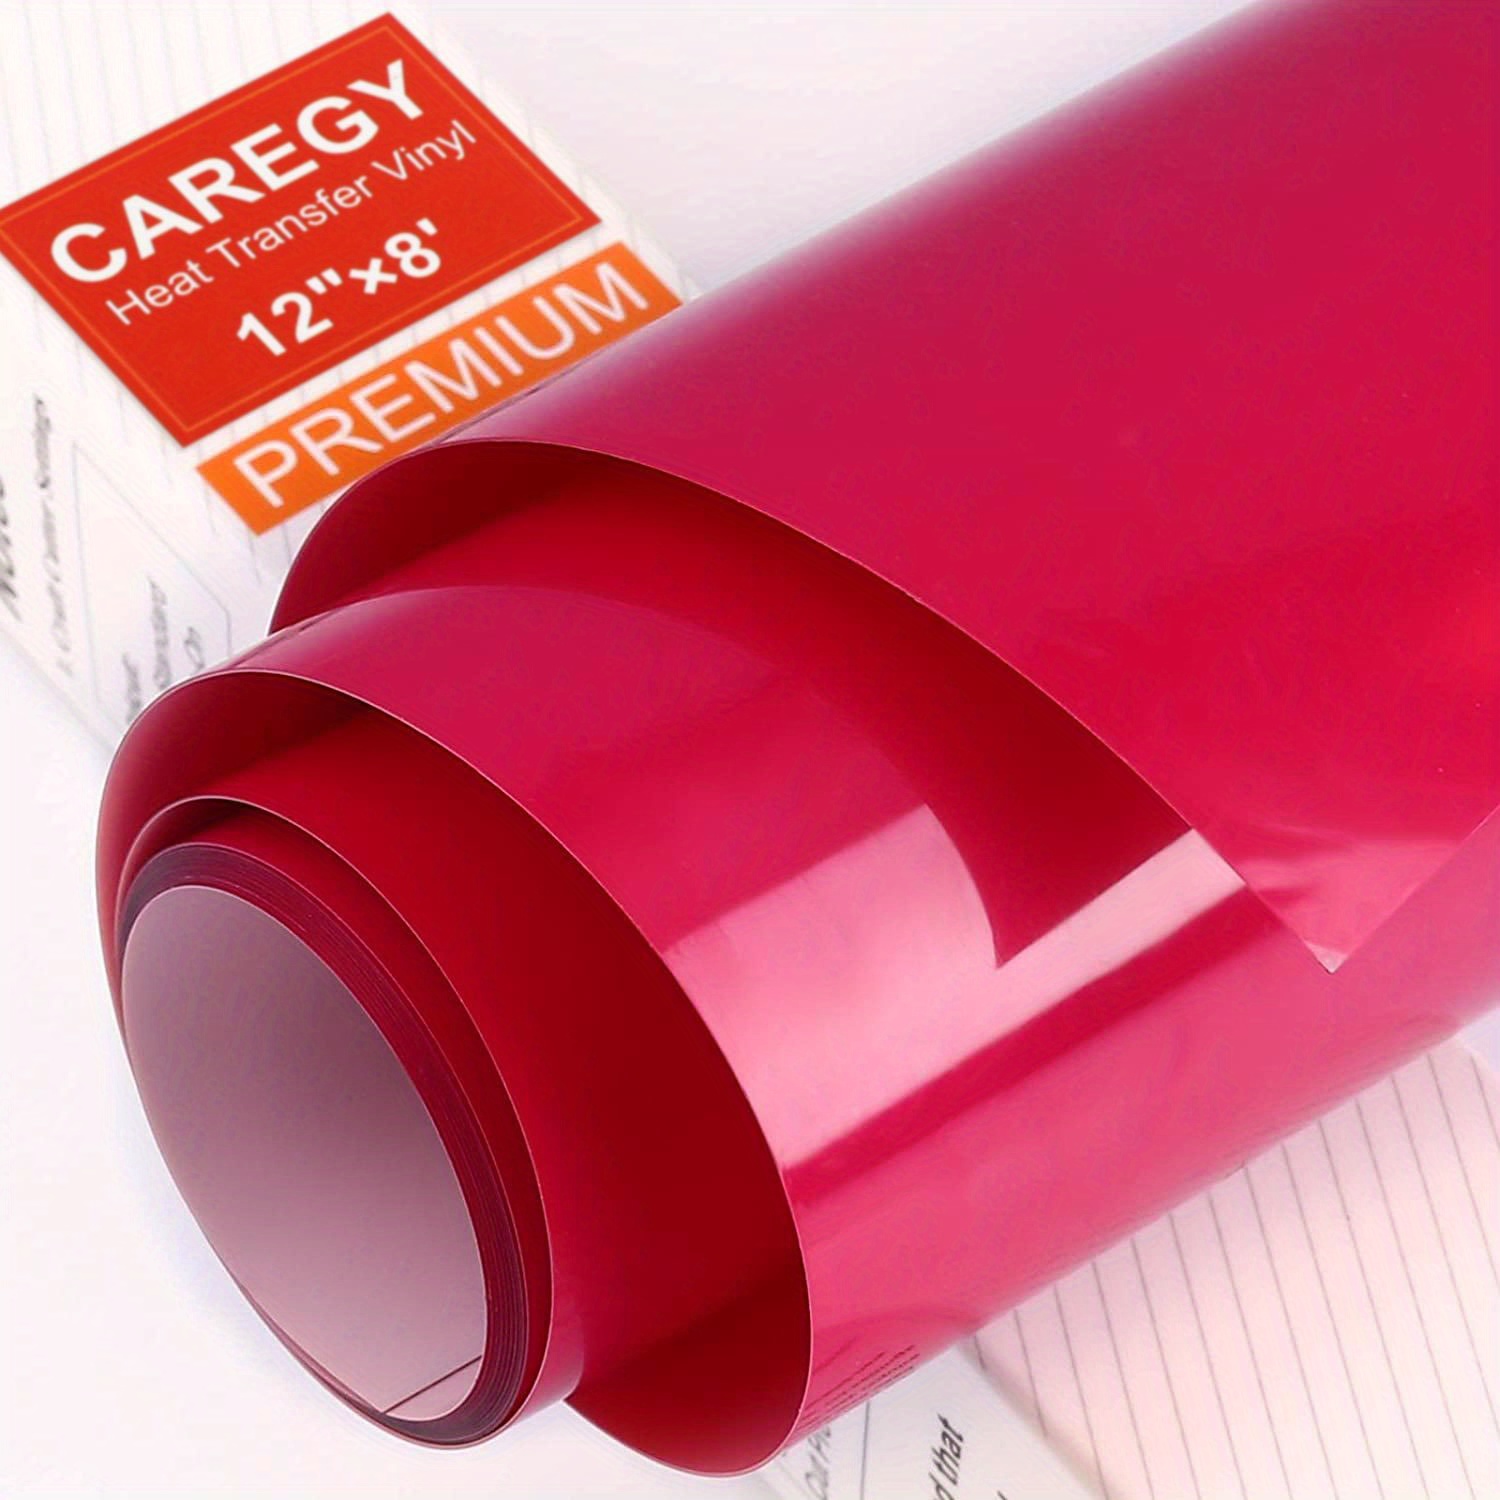 CAREGY Caregy Heat Transfer Vinyl Htv Iron On Vinyl For T-Shirts 12 Inches  By 20 Feet Roll (Red)